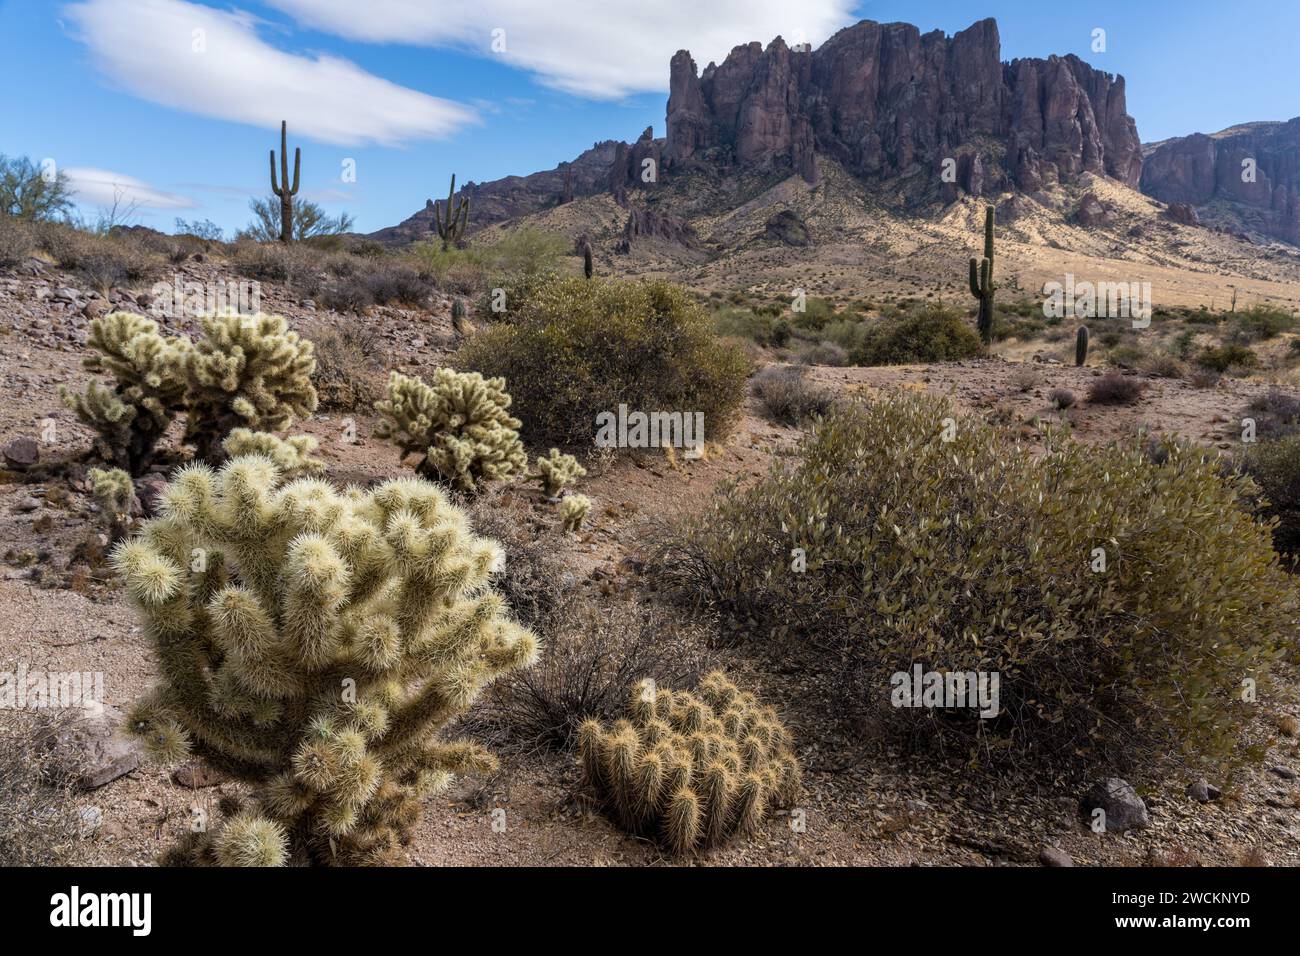 Teddy Bear Cholla and Superstition Mountain.  Lost Dutchman State Park, Apache Junction, Arizona. Stock Photo